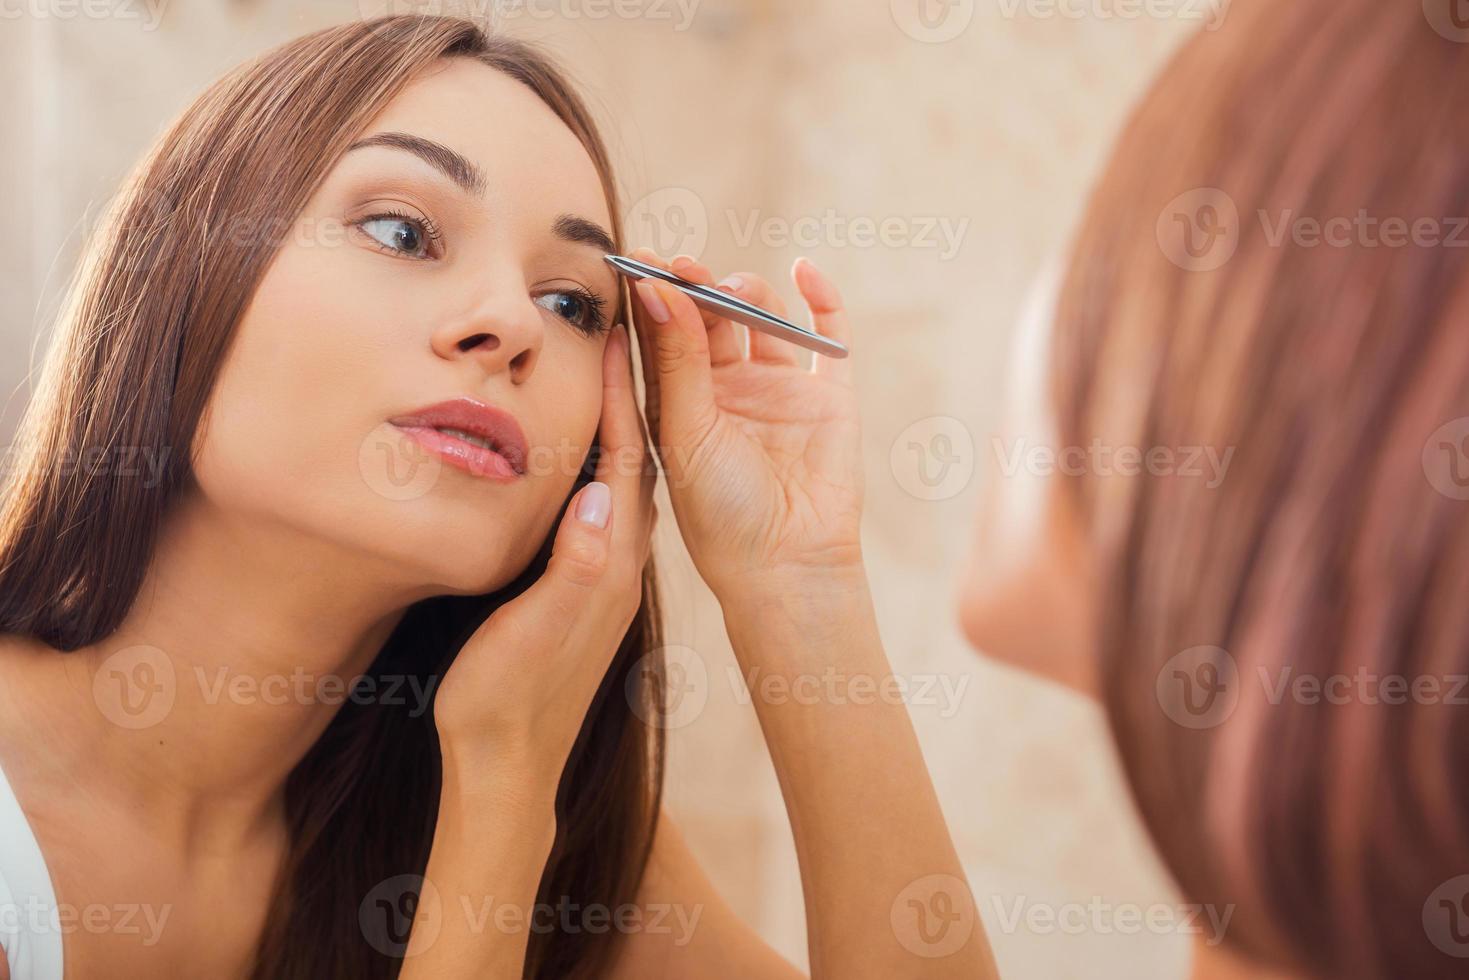 Tweezing eyebrows. Beautiful young woman tweezing her eyebrows while looking at the mirror photo